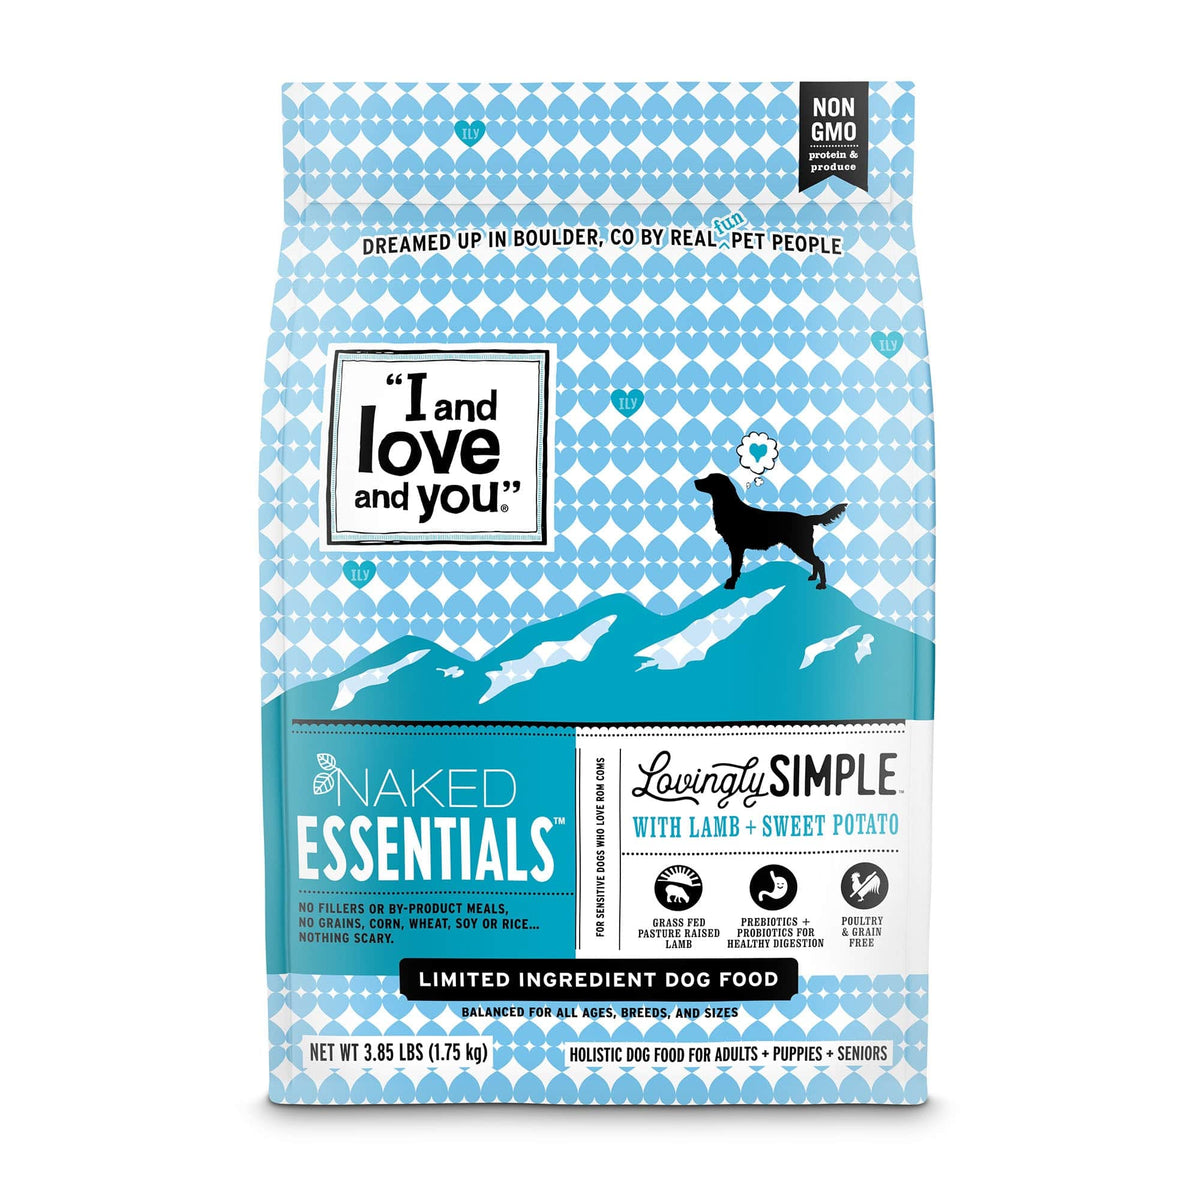 Lovingly Simple - Lamb + Sweet Potato dog food bag with a silhouette of a dog and a heart in a thought bubble.